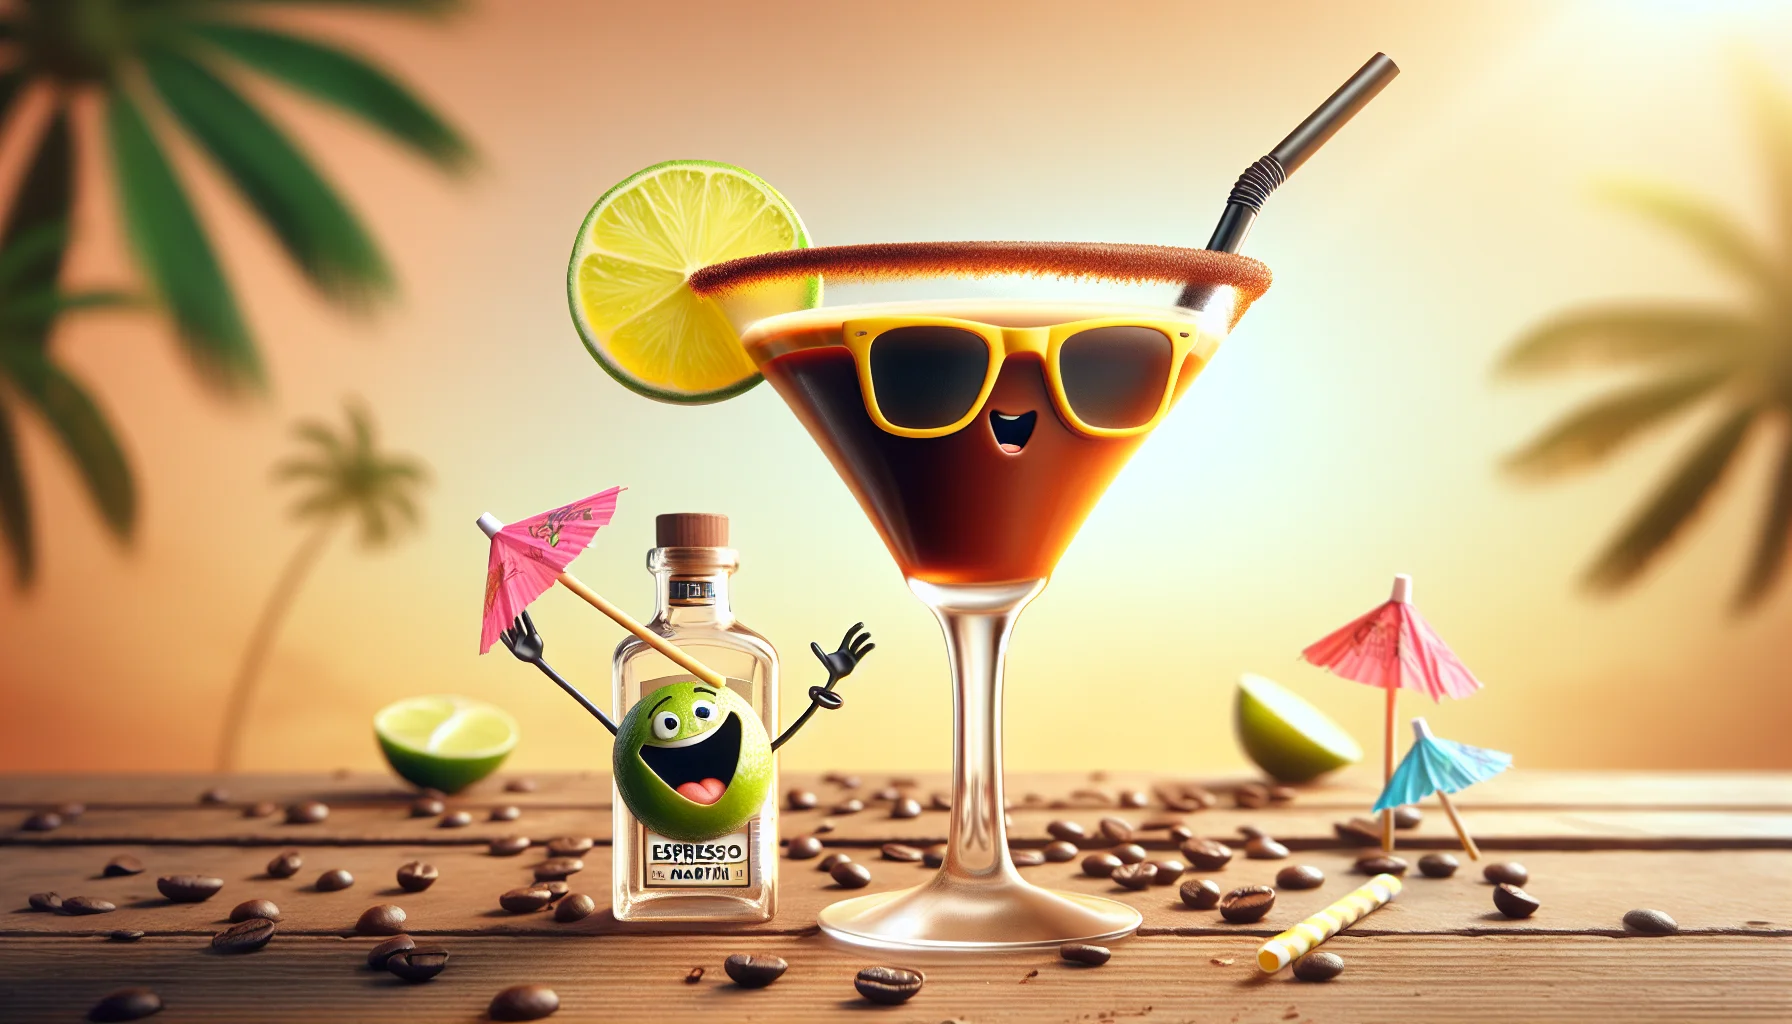 Craft a humorous yet realistic scene with an espresso martini composed of tequila right in the center. The martini wears yellow sunglasses, illustrated as if it had a happy, inviting face. On the side, a lime slice acts as a little companion, humorously trying to climb the glass. The background is lively with soft, warm colors symbolizing a festive setting, while playful cocktail umbrellas scattered around the scene add to the party vibe. The whole image should radiate a vibrant, attractive aura, encouraging people to partake in the joviality.